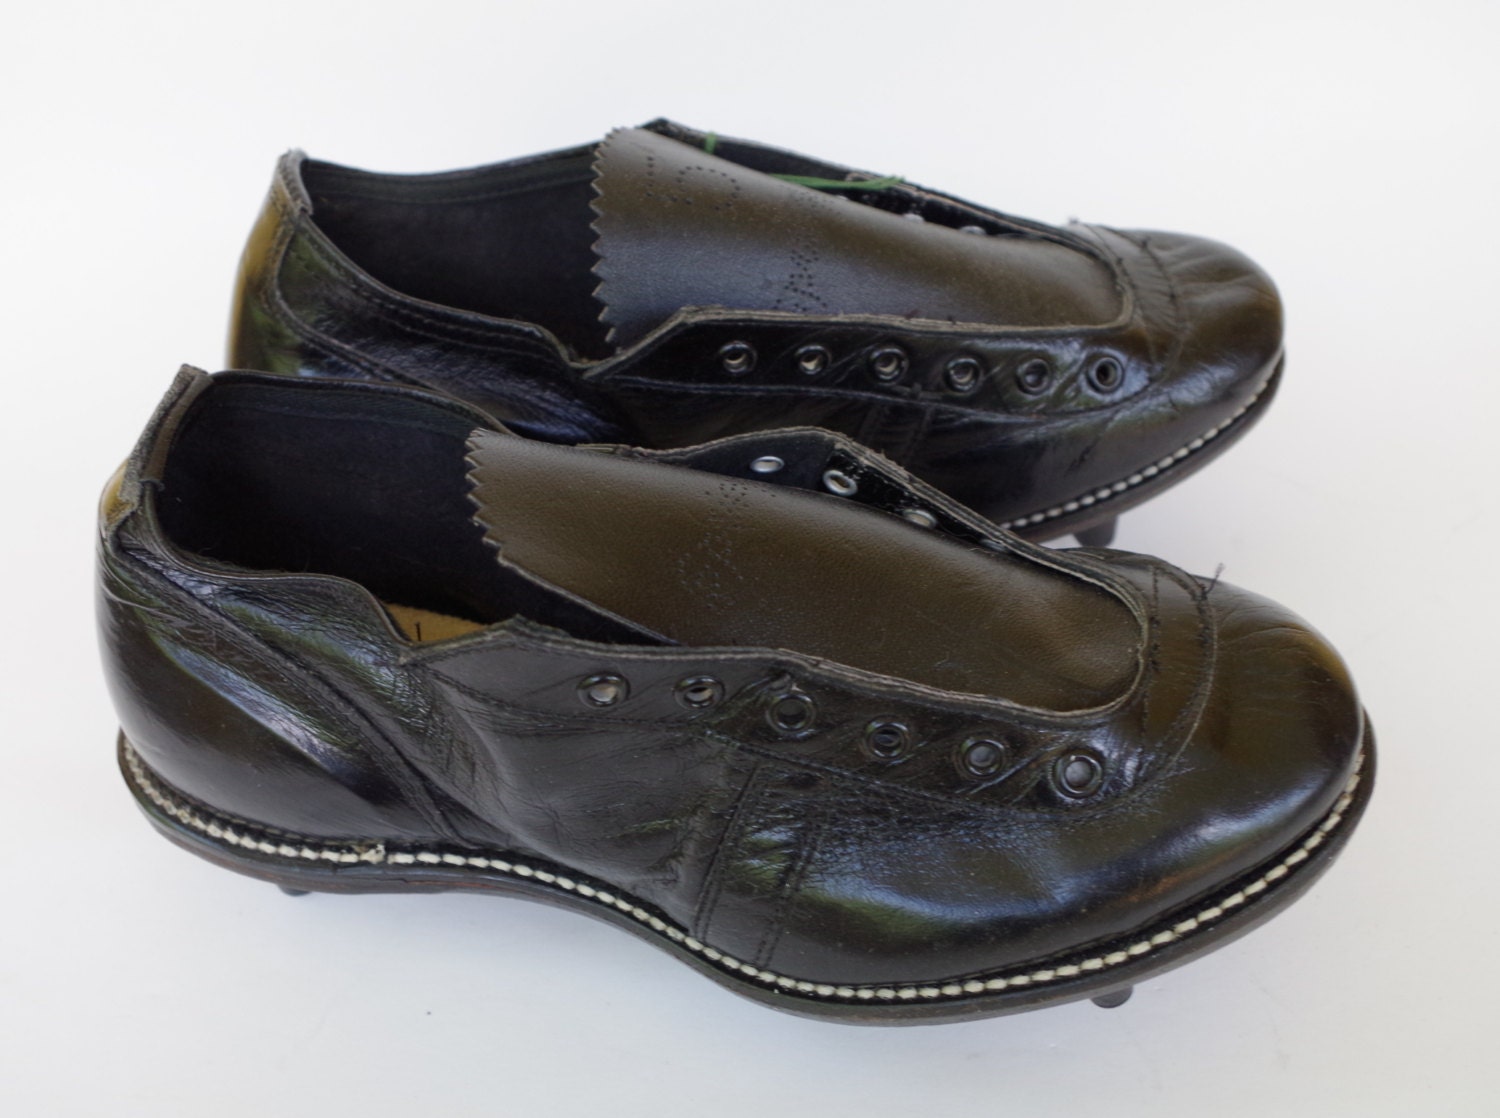 Vintage 1950s Boys Kangaroo Leather Cleats by Springfield